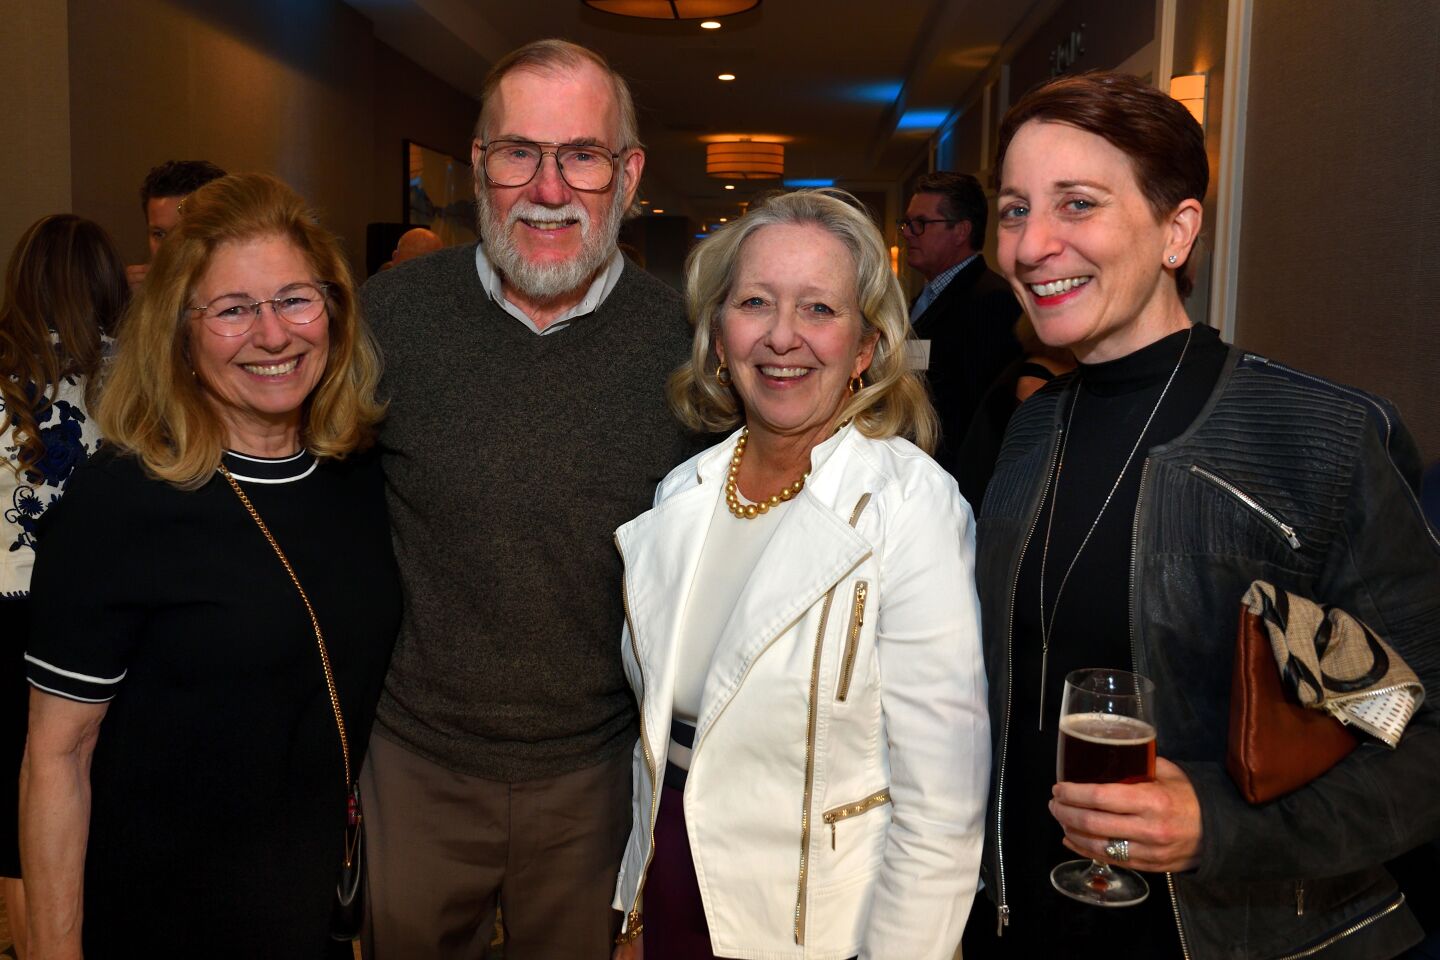 Sandra Timmons, Richard Sandstrom, Rebecca Smith and Caitlin Weil